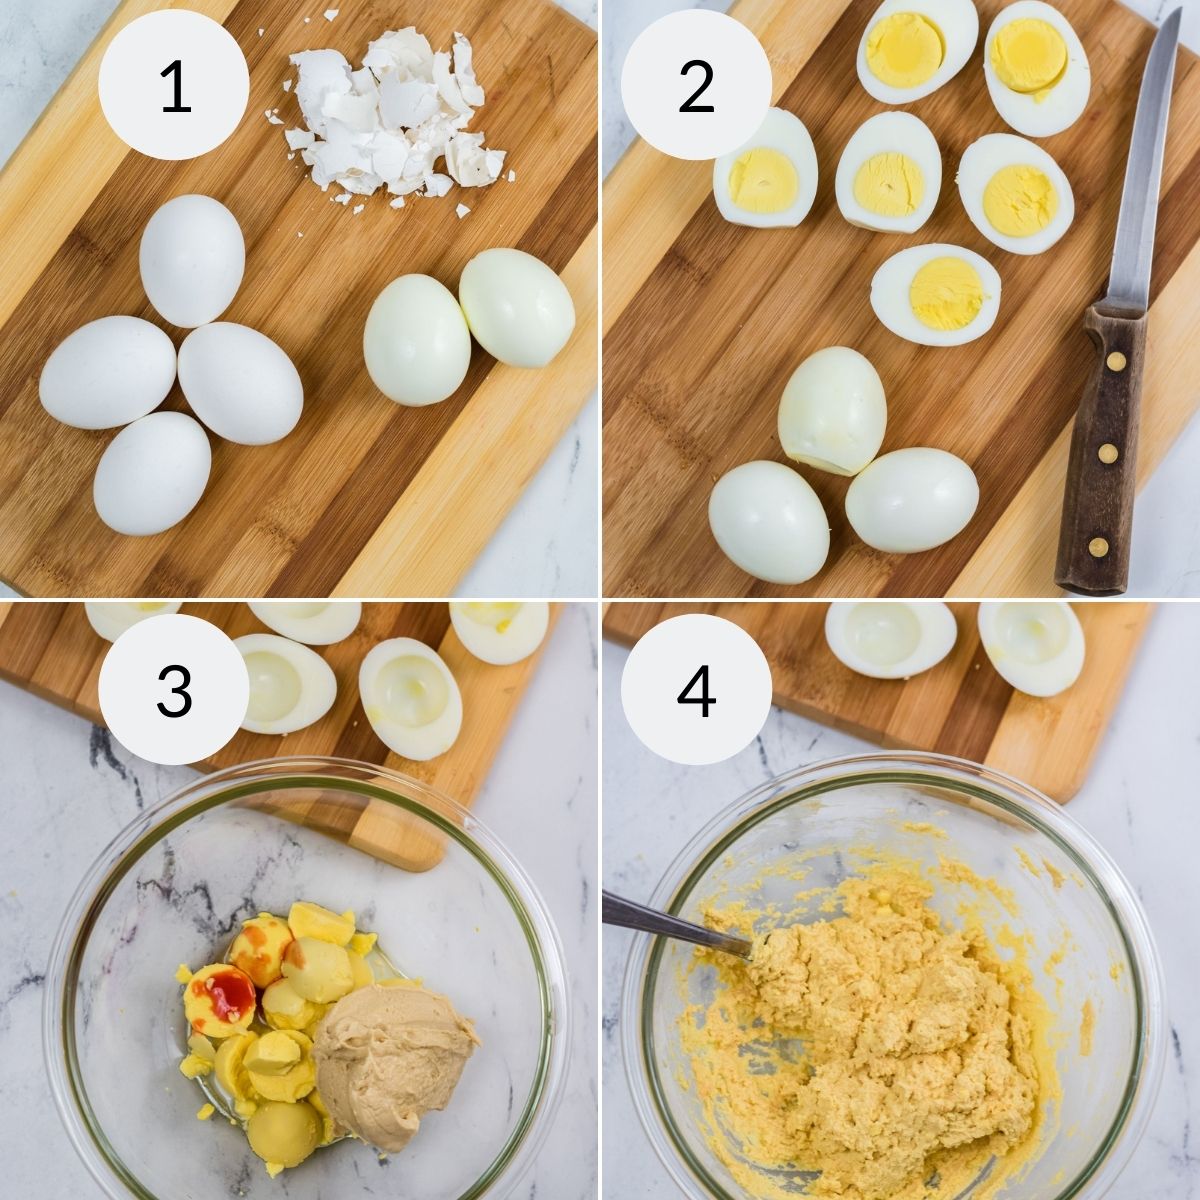 Hard boiled eggs on a cutting board then being cut and yokes being added to a boil.